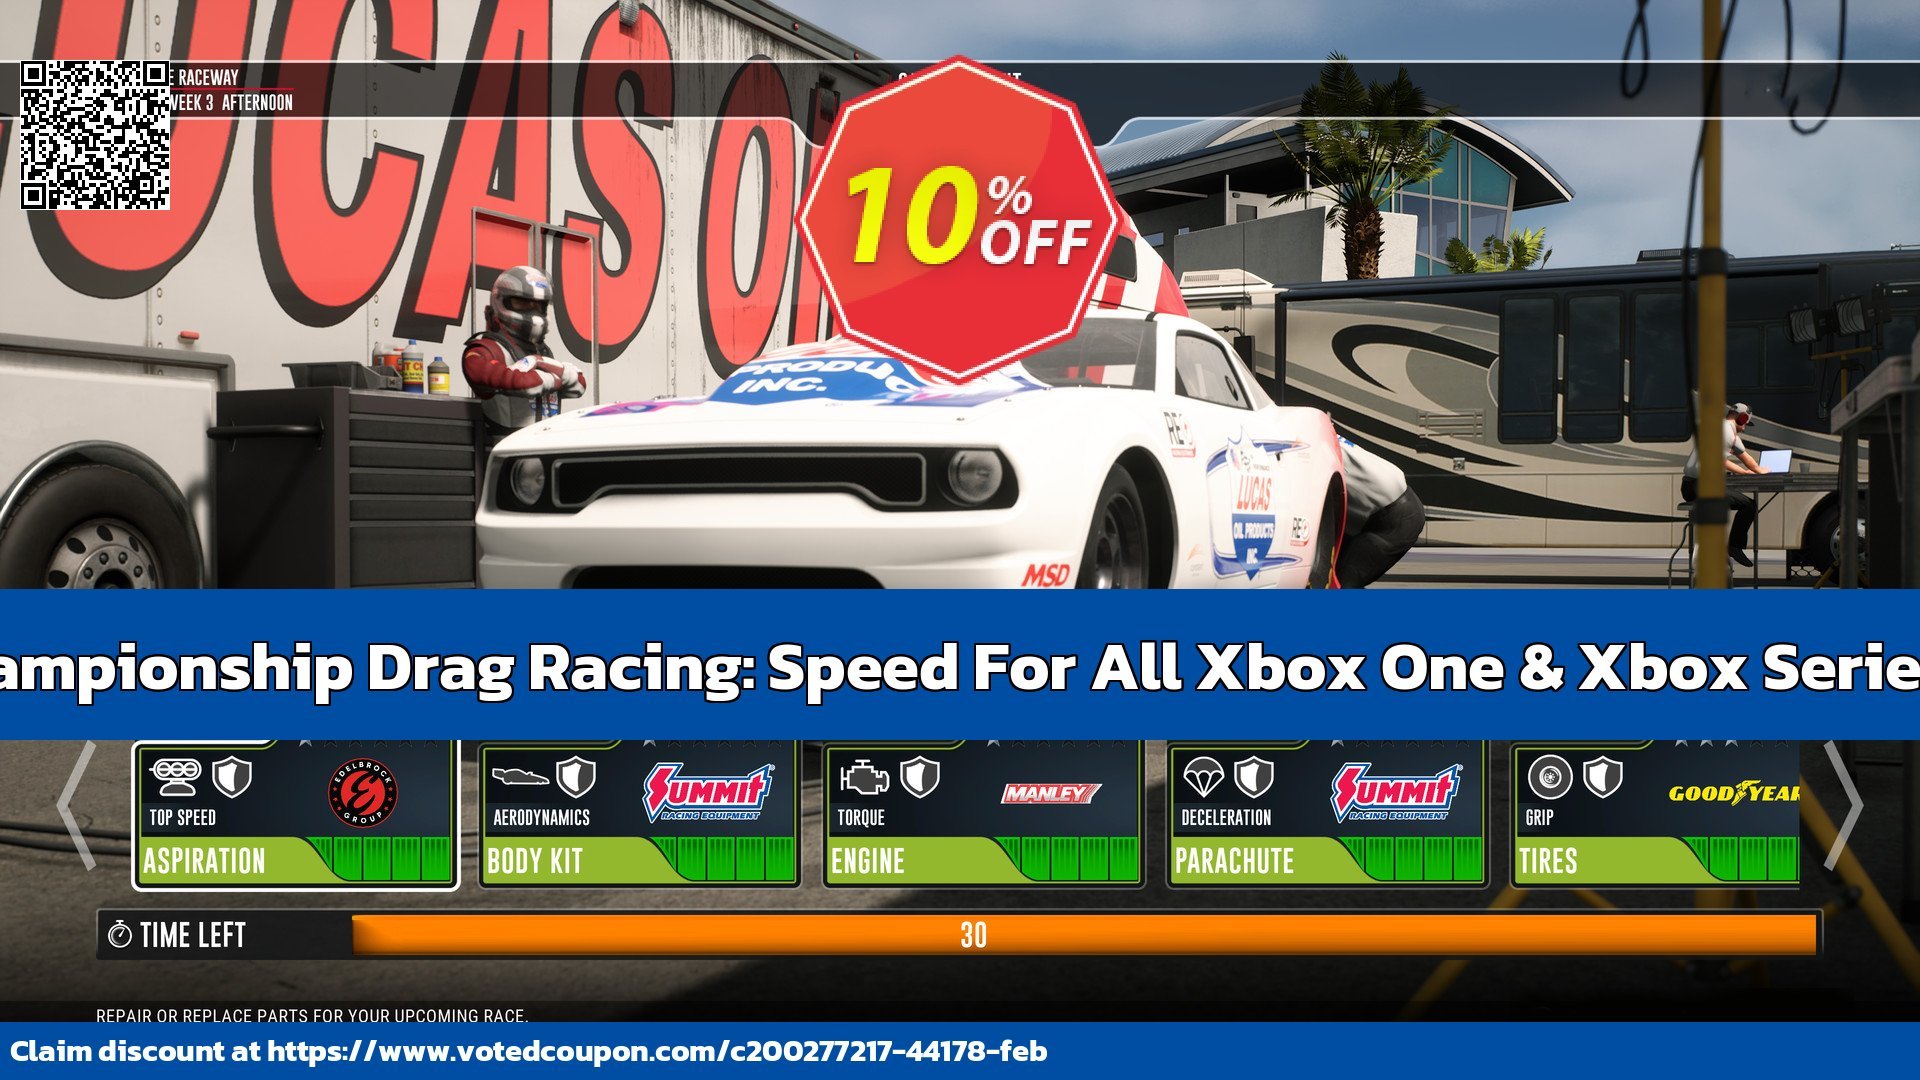 NHRA Championship Drag Racing: Speed For All Xbox One & Xbox Series X|S, US  voted-on promotion codes